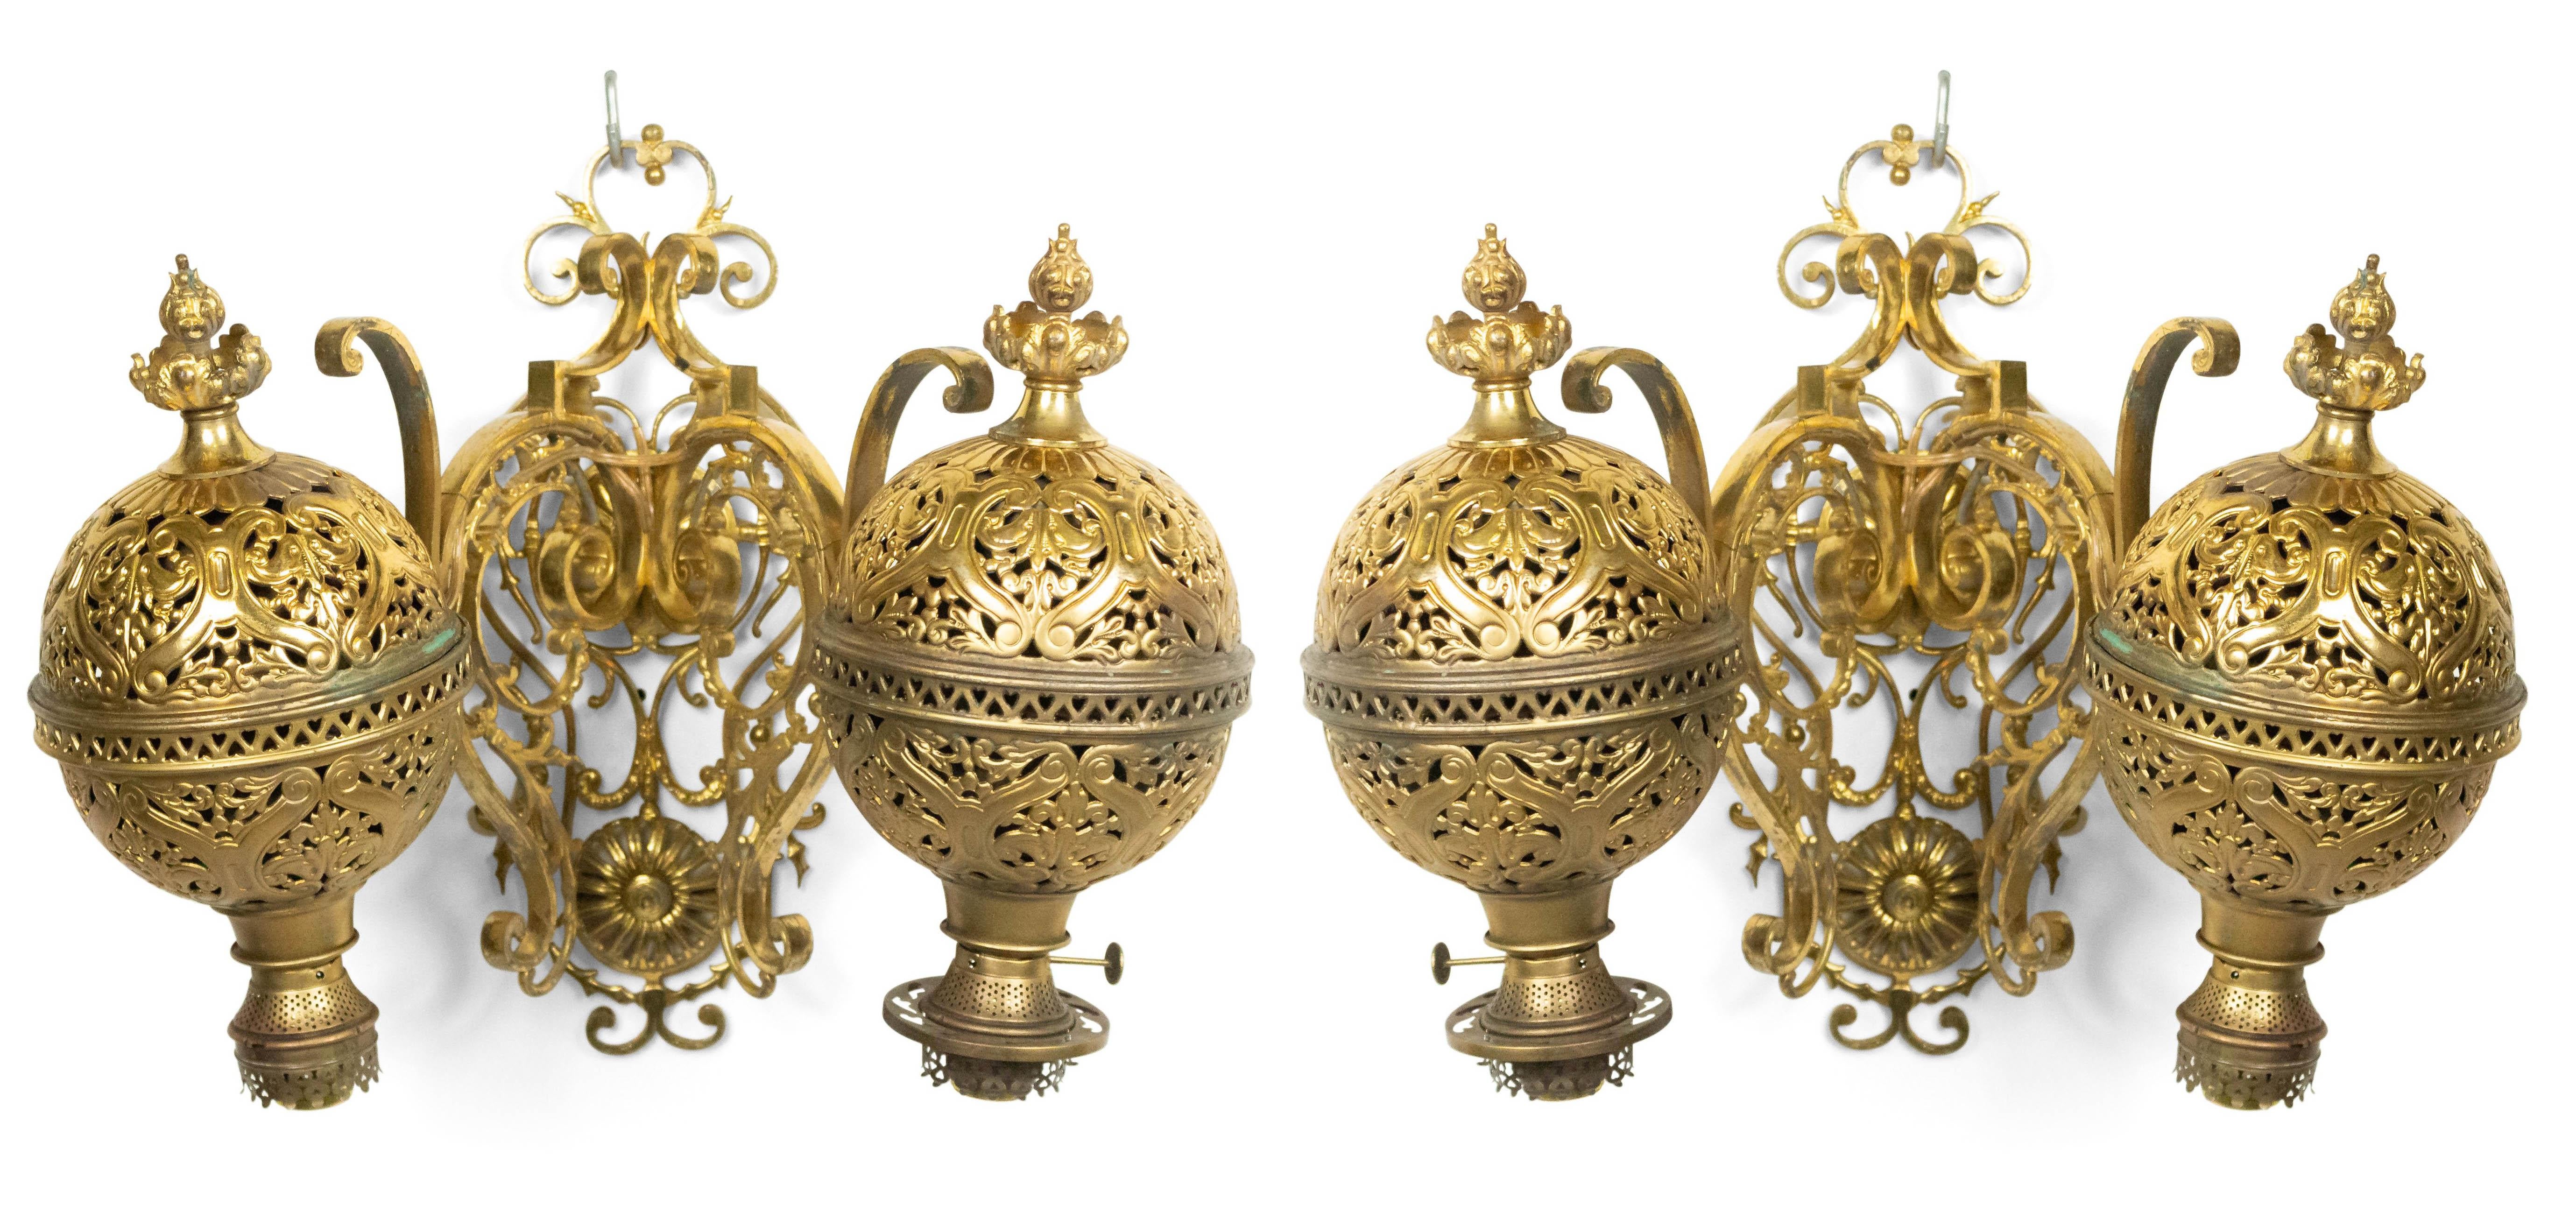 Pair of American Victorian brass oil lamp wall sconces with a filigree design and two scroll arms holding large filigree balls. (PRICED AS Pair)
